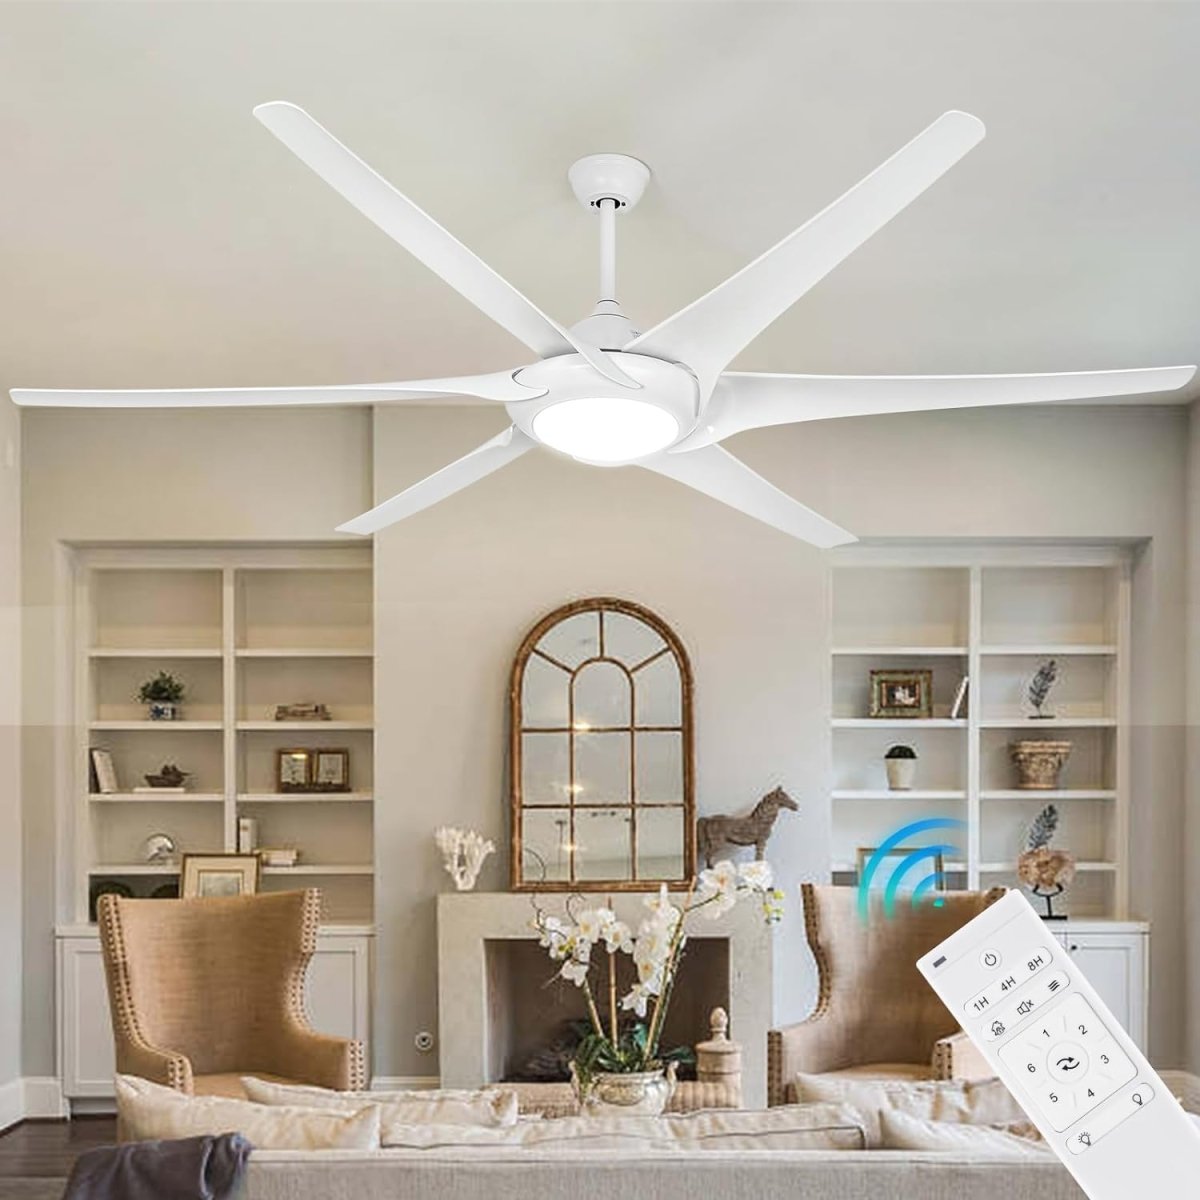 Depuley 80" Ceiling Fan with Lights, Large Reversible Ceiling Fan with 6 Blades, 24W Modern Ceiling Fans with 5-Speed for Living Room & Covered Outdoor, 3 Color Changeable, Timer - WS-FPZ33-24B 2 | DEPULEY